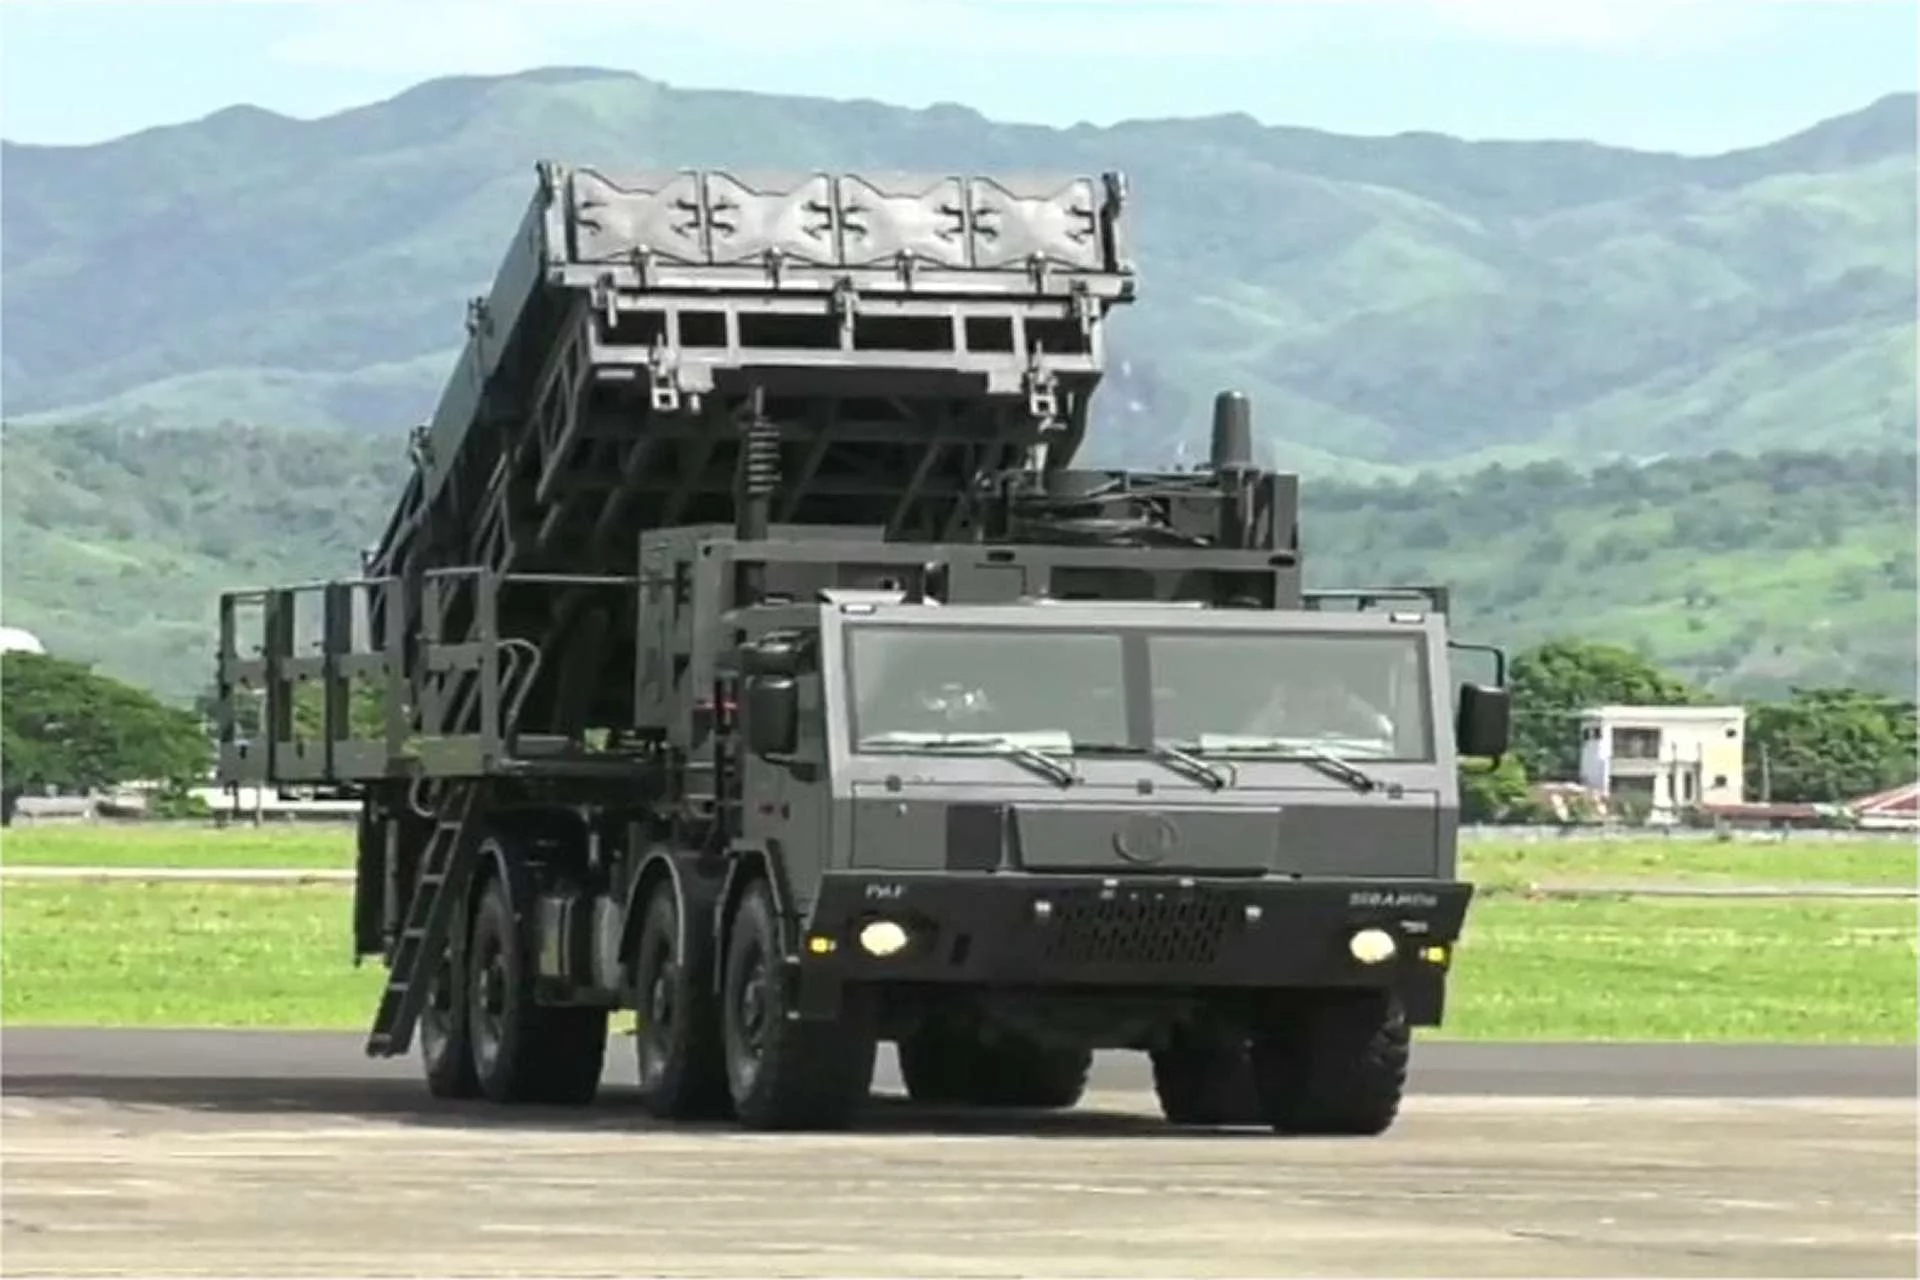 Philippine_Air_Force_Presents_Its_New_SPYDER-MR_Missile_System_001-7232b267.webp